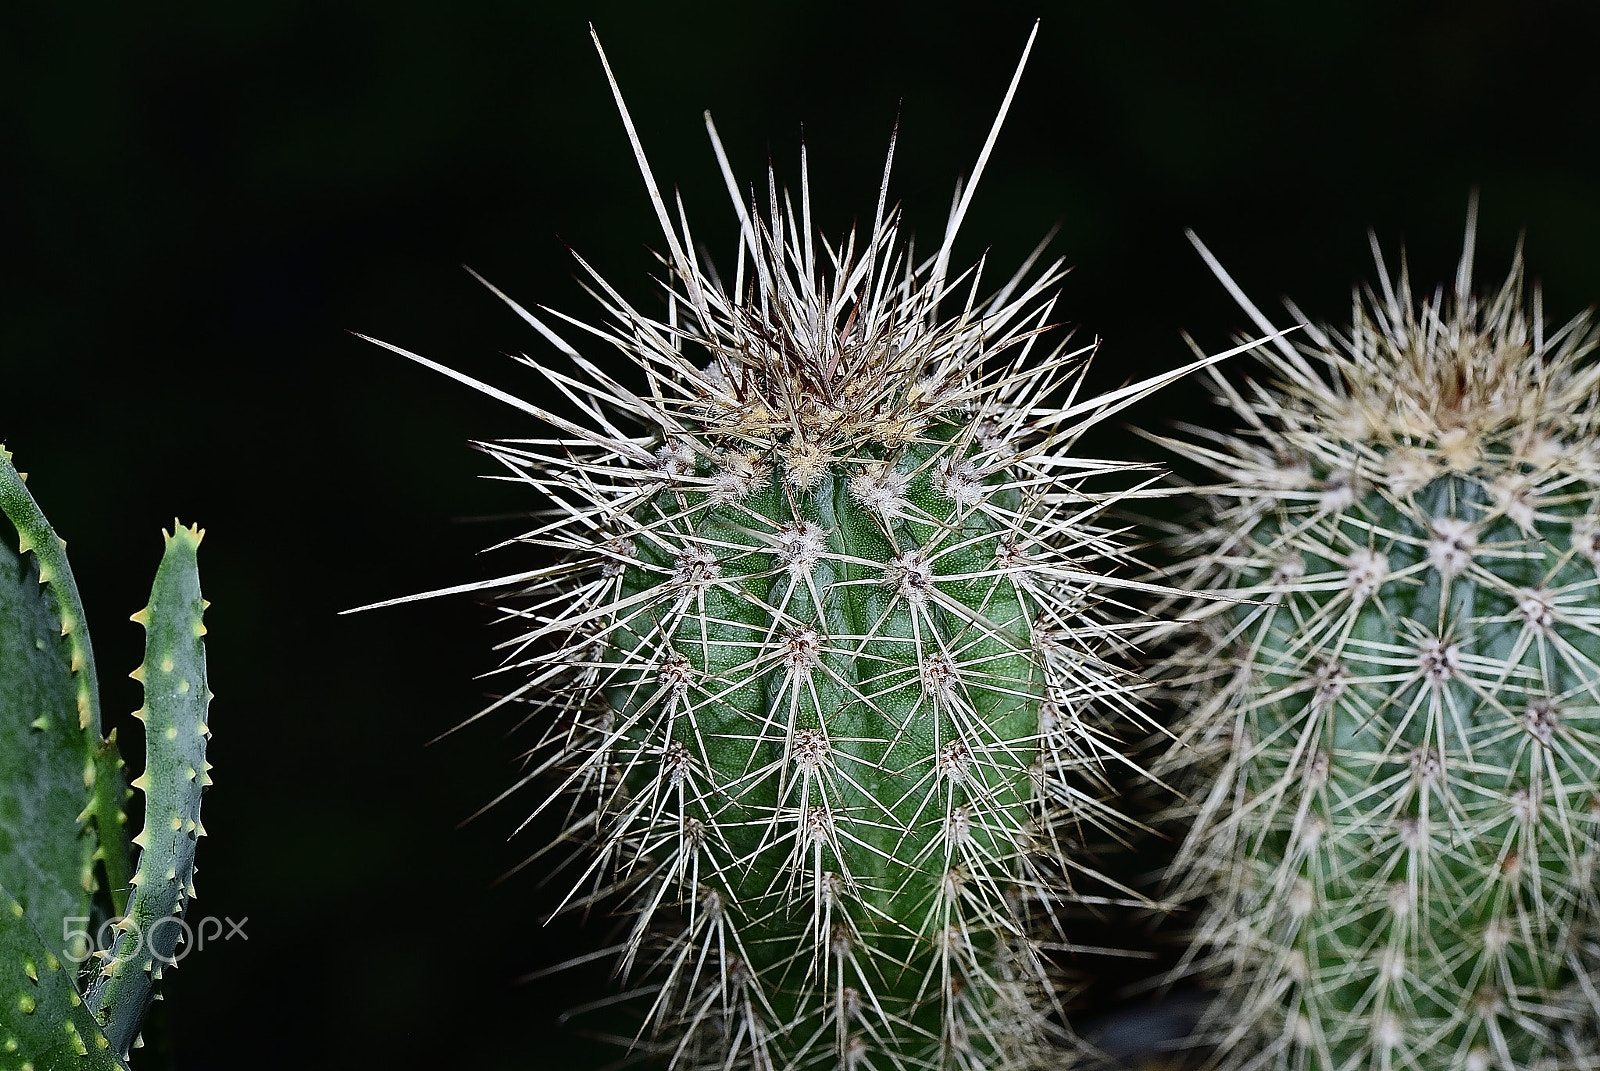 Nikon D200 sample photo. Don't touch the cactus, painful'll thorn photography